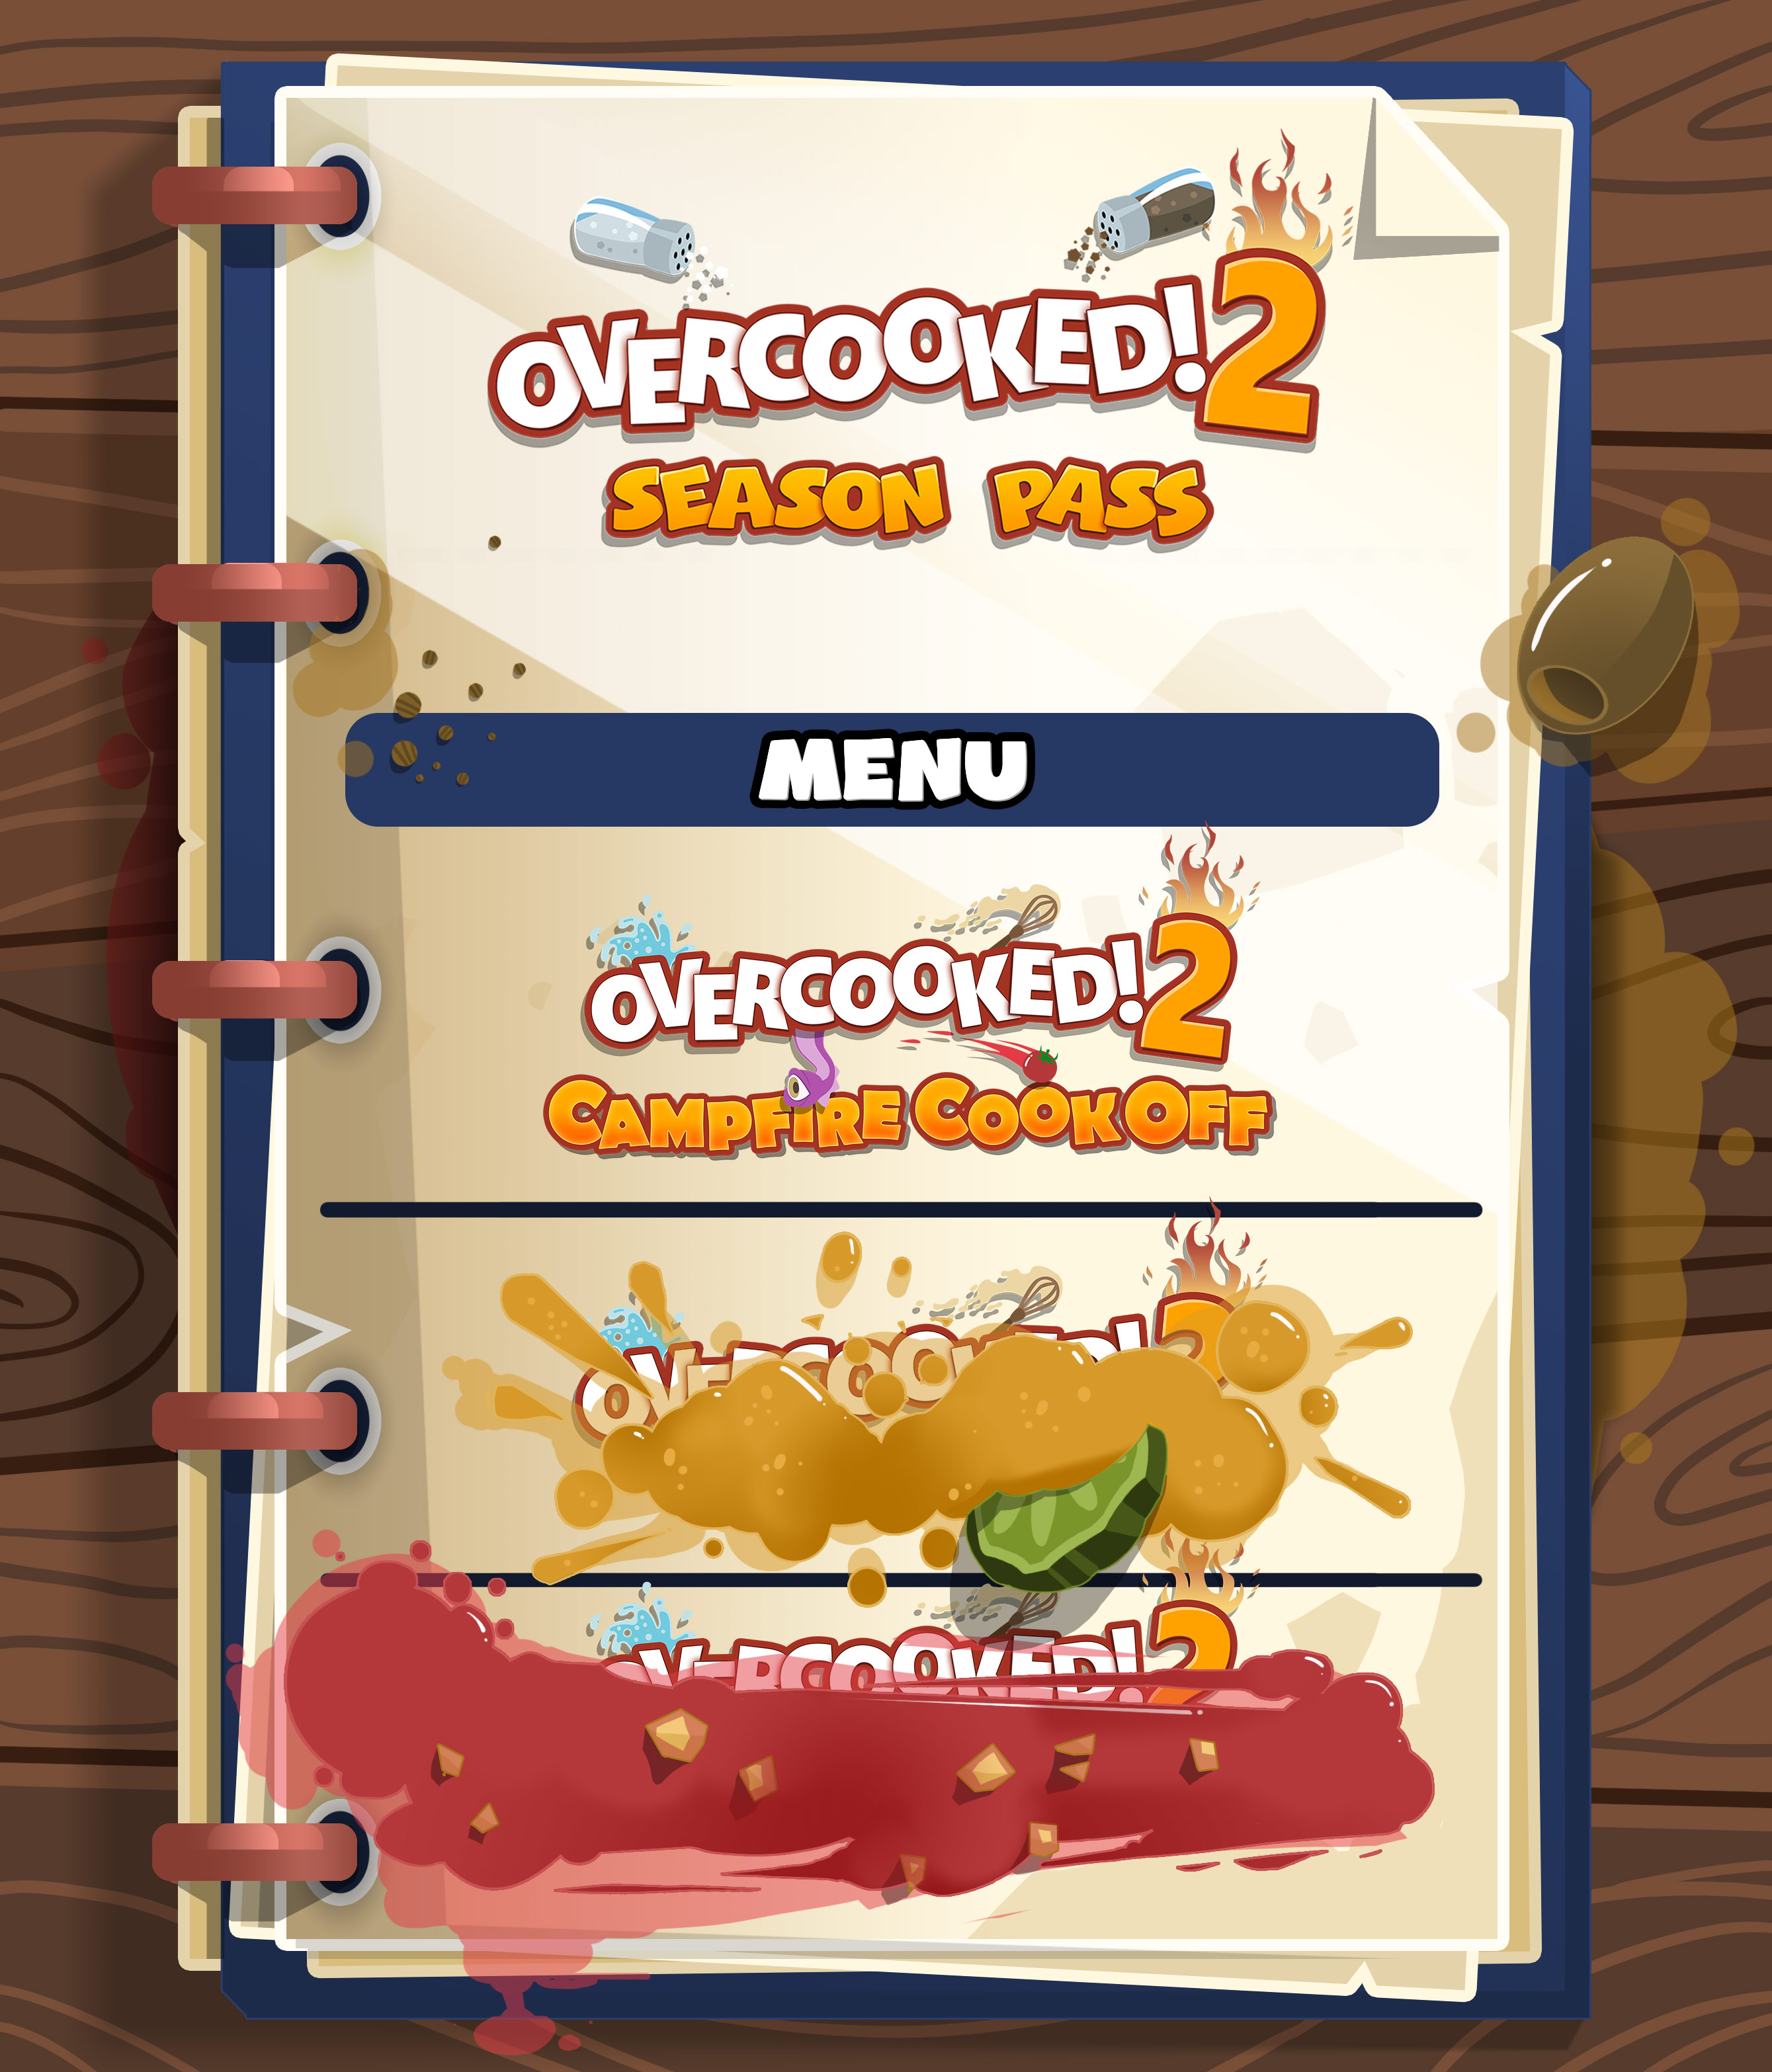 Overcooked! 2 – Campfire Cook Off DLC & Season Pass Available - Team17 Digital LTD - The Spirit Of Independent Games